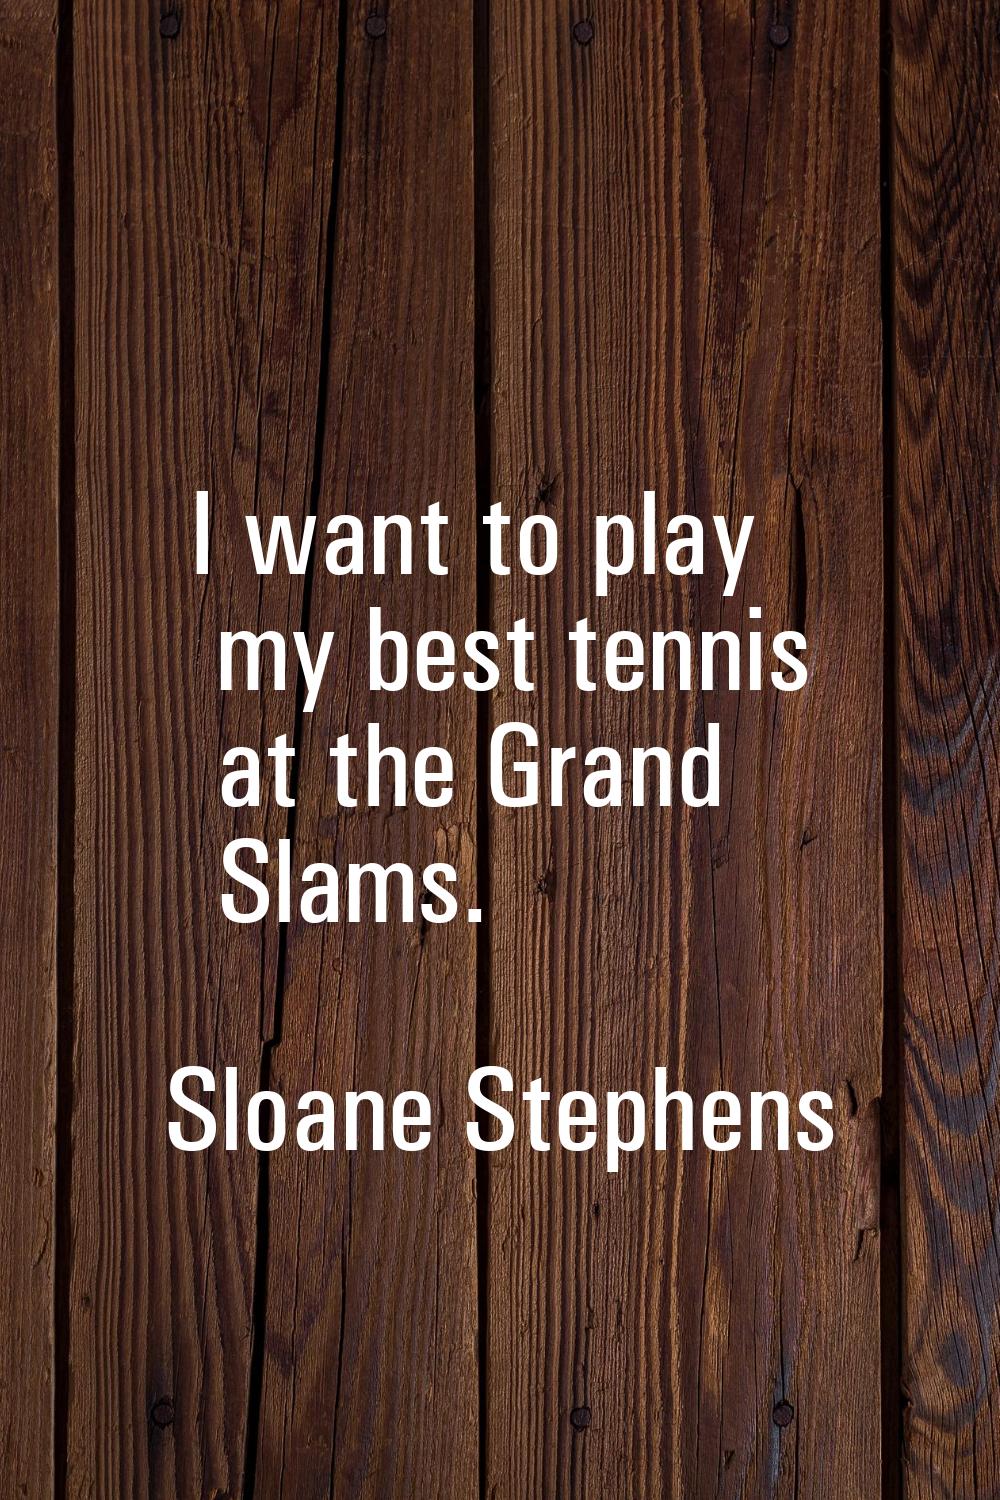 I want to play my best tennis at the Grand Slams.